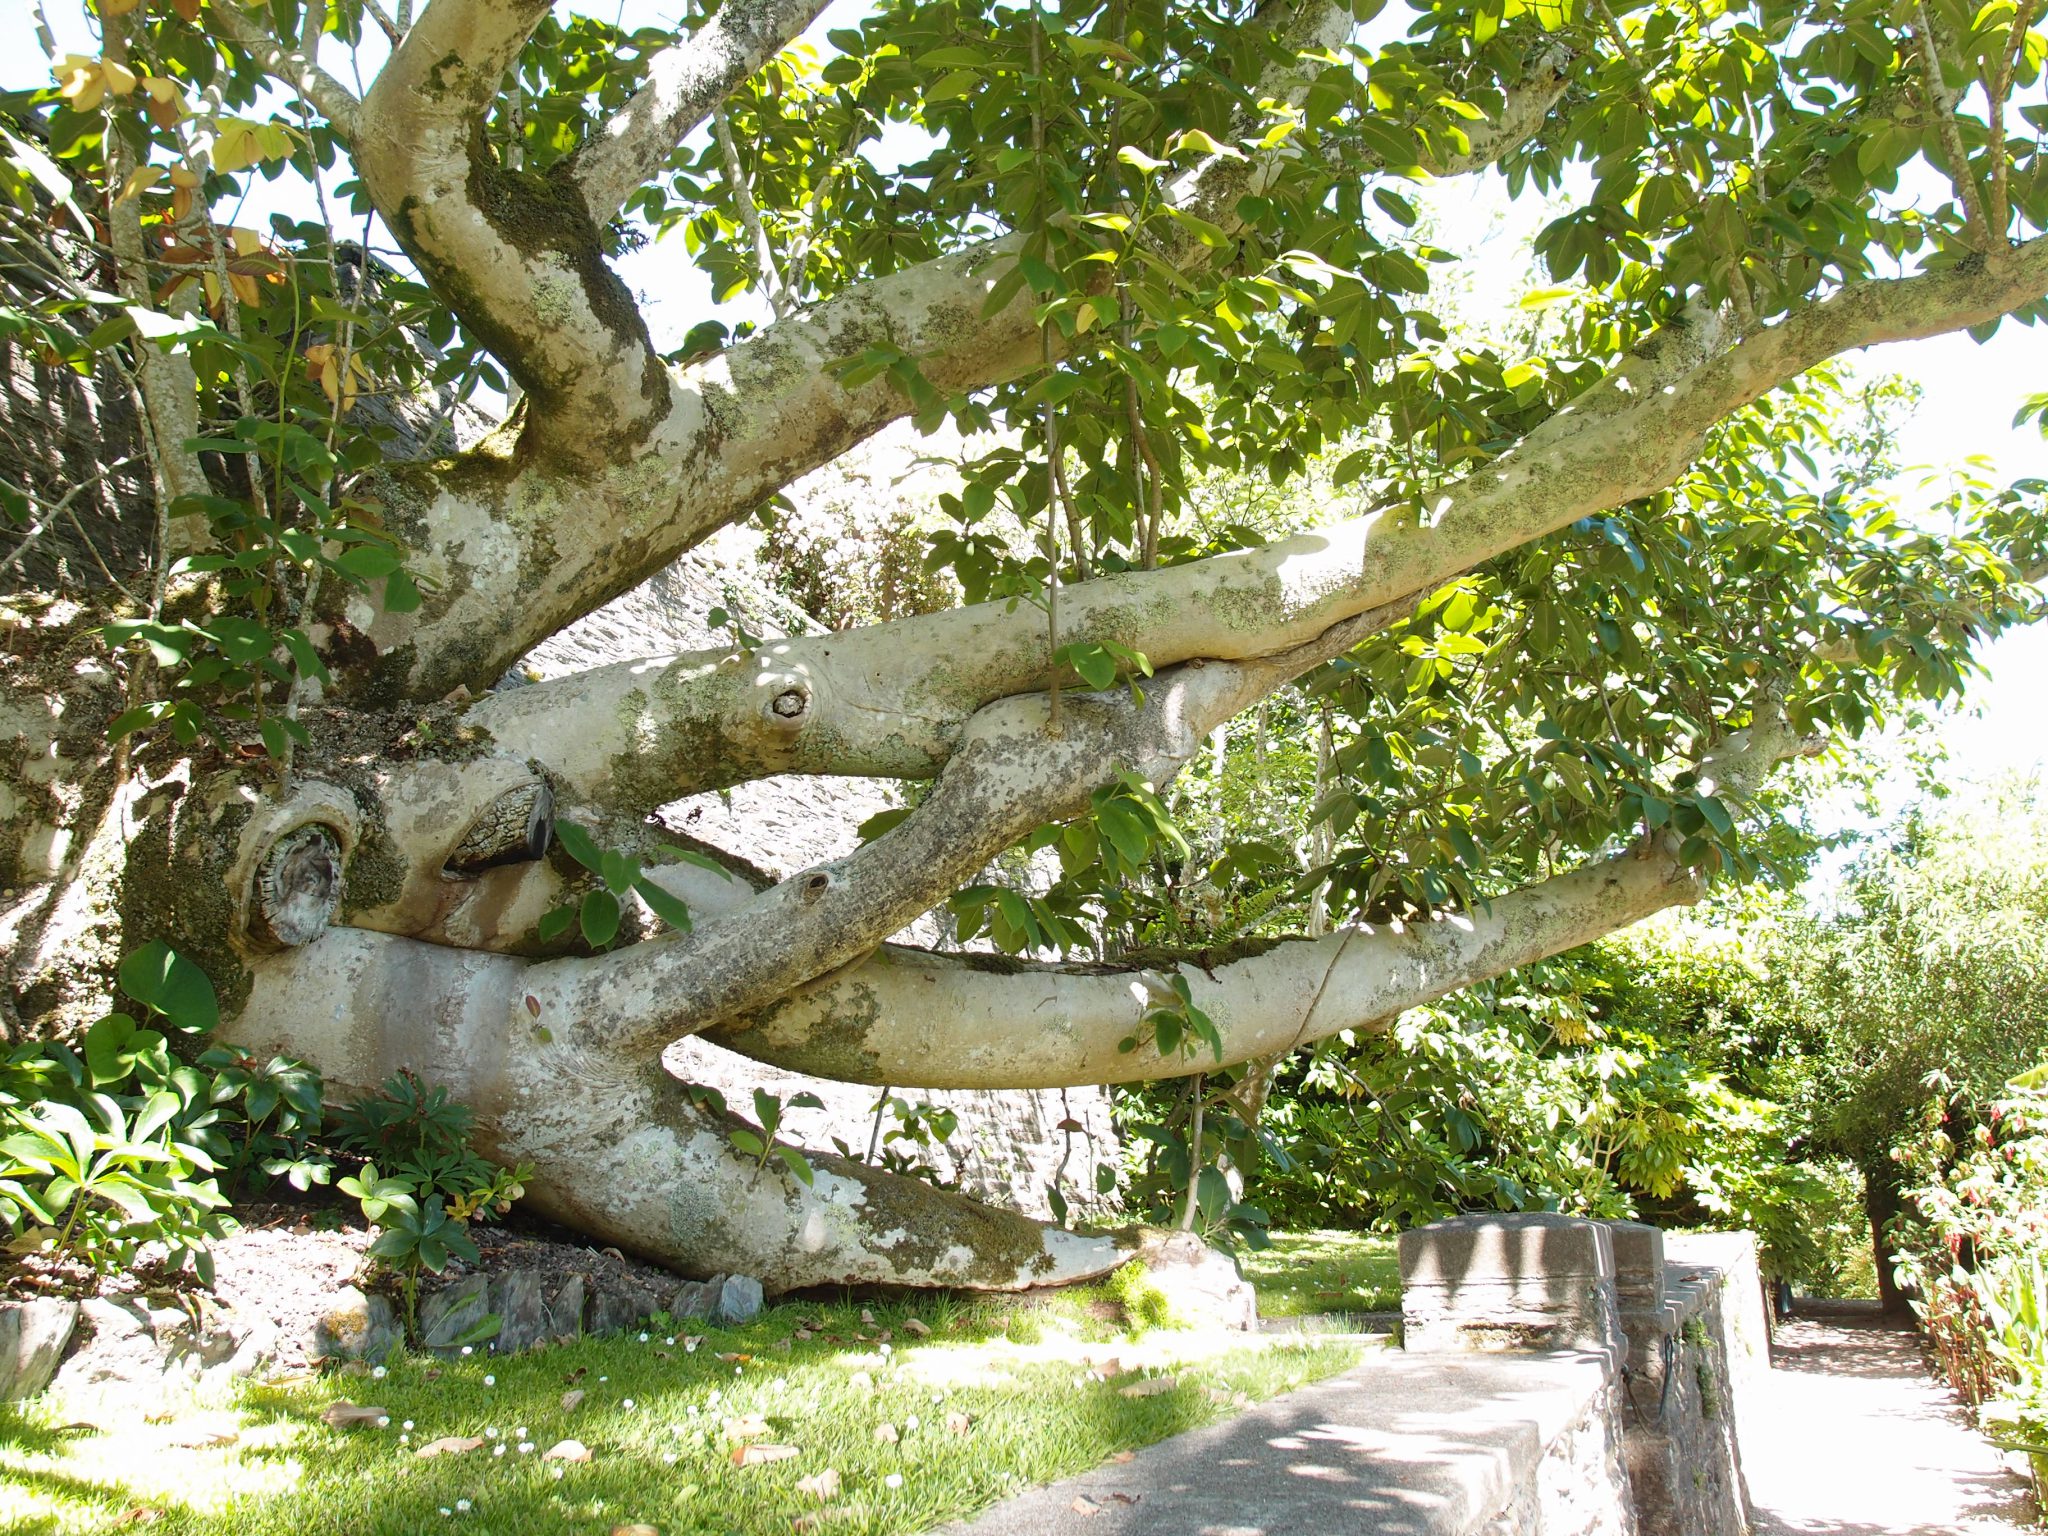  Below the retaining wall of the Statue Garden, a Himilayan Magnolia campbelli grows along the path leading to the Banana Garden. Planted in 1901, the magnolia tipped over in the Winter of 1999 during a heavy rain, but, despite its topsy-turvy situation, the tree continues to show healthy growth. 